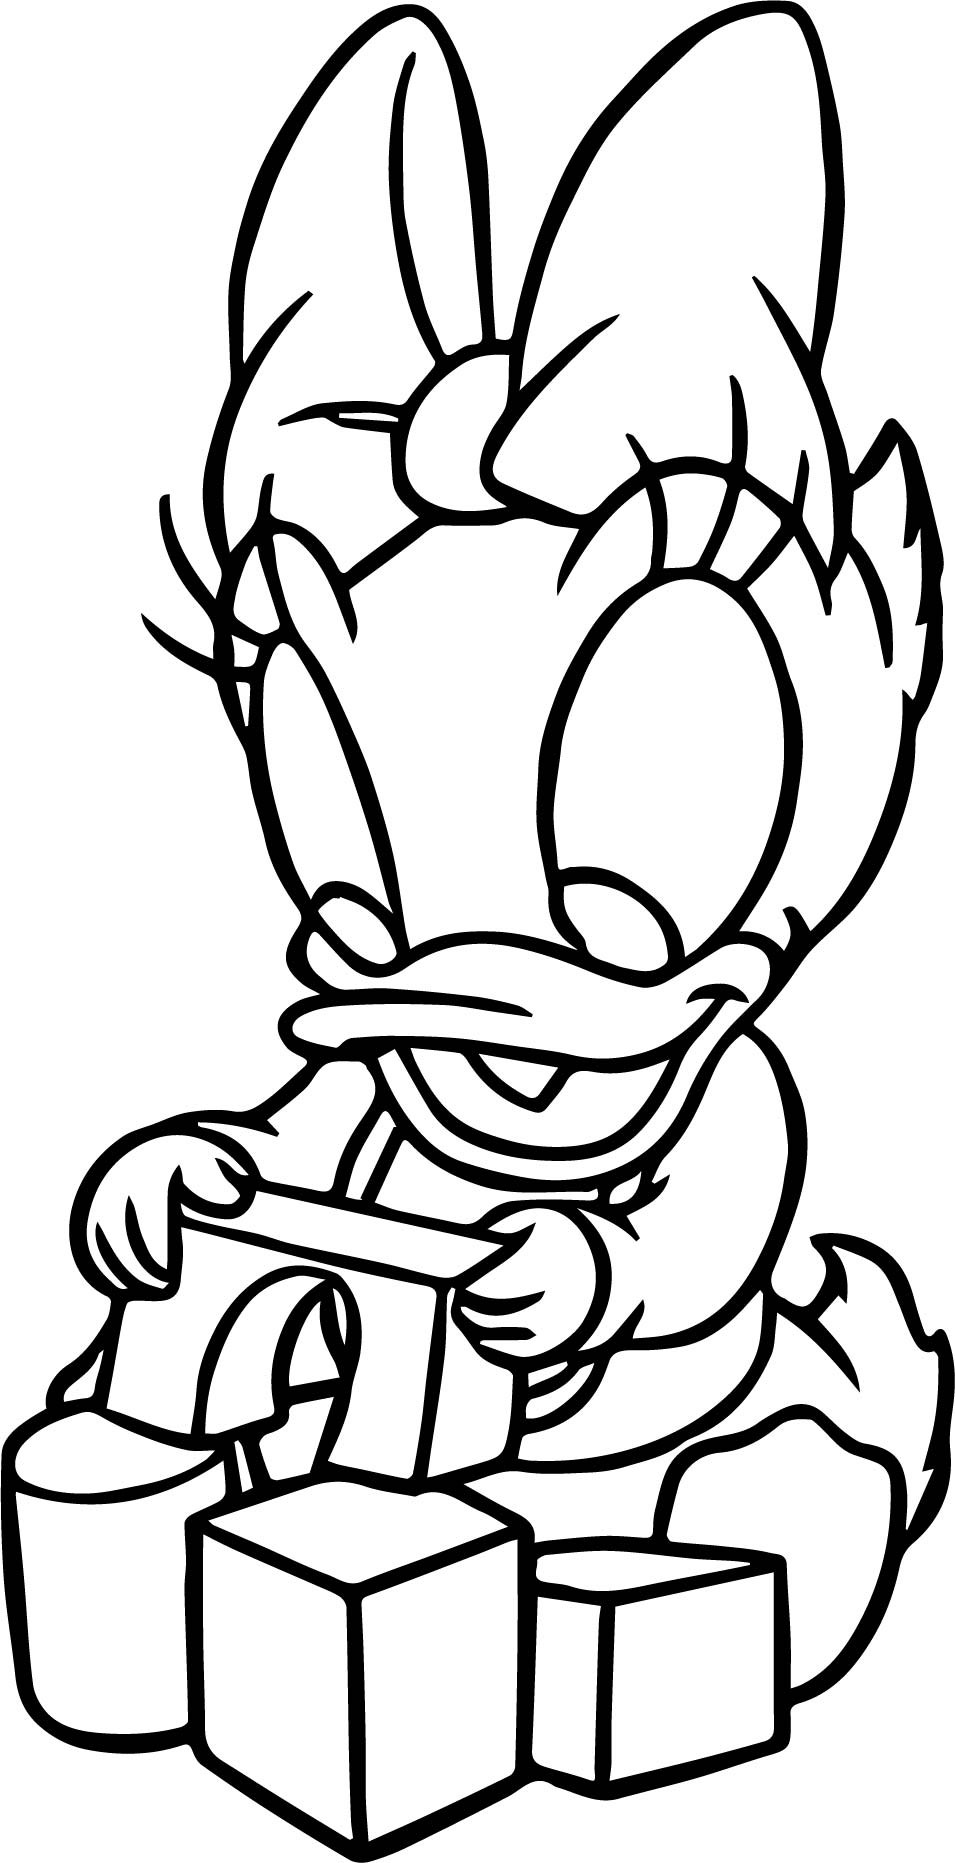 Baby Daisy Duck Coloring Pages
 Baby Daisy Duck Playing With Blocks Coloring Page